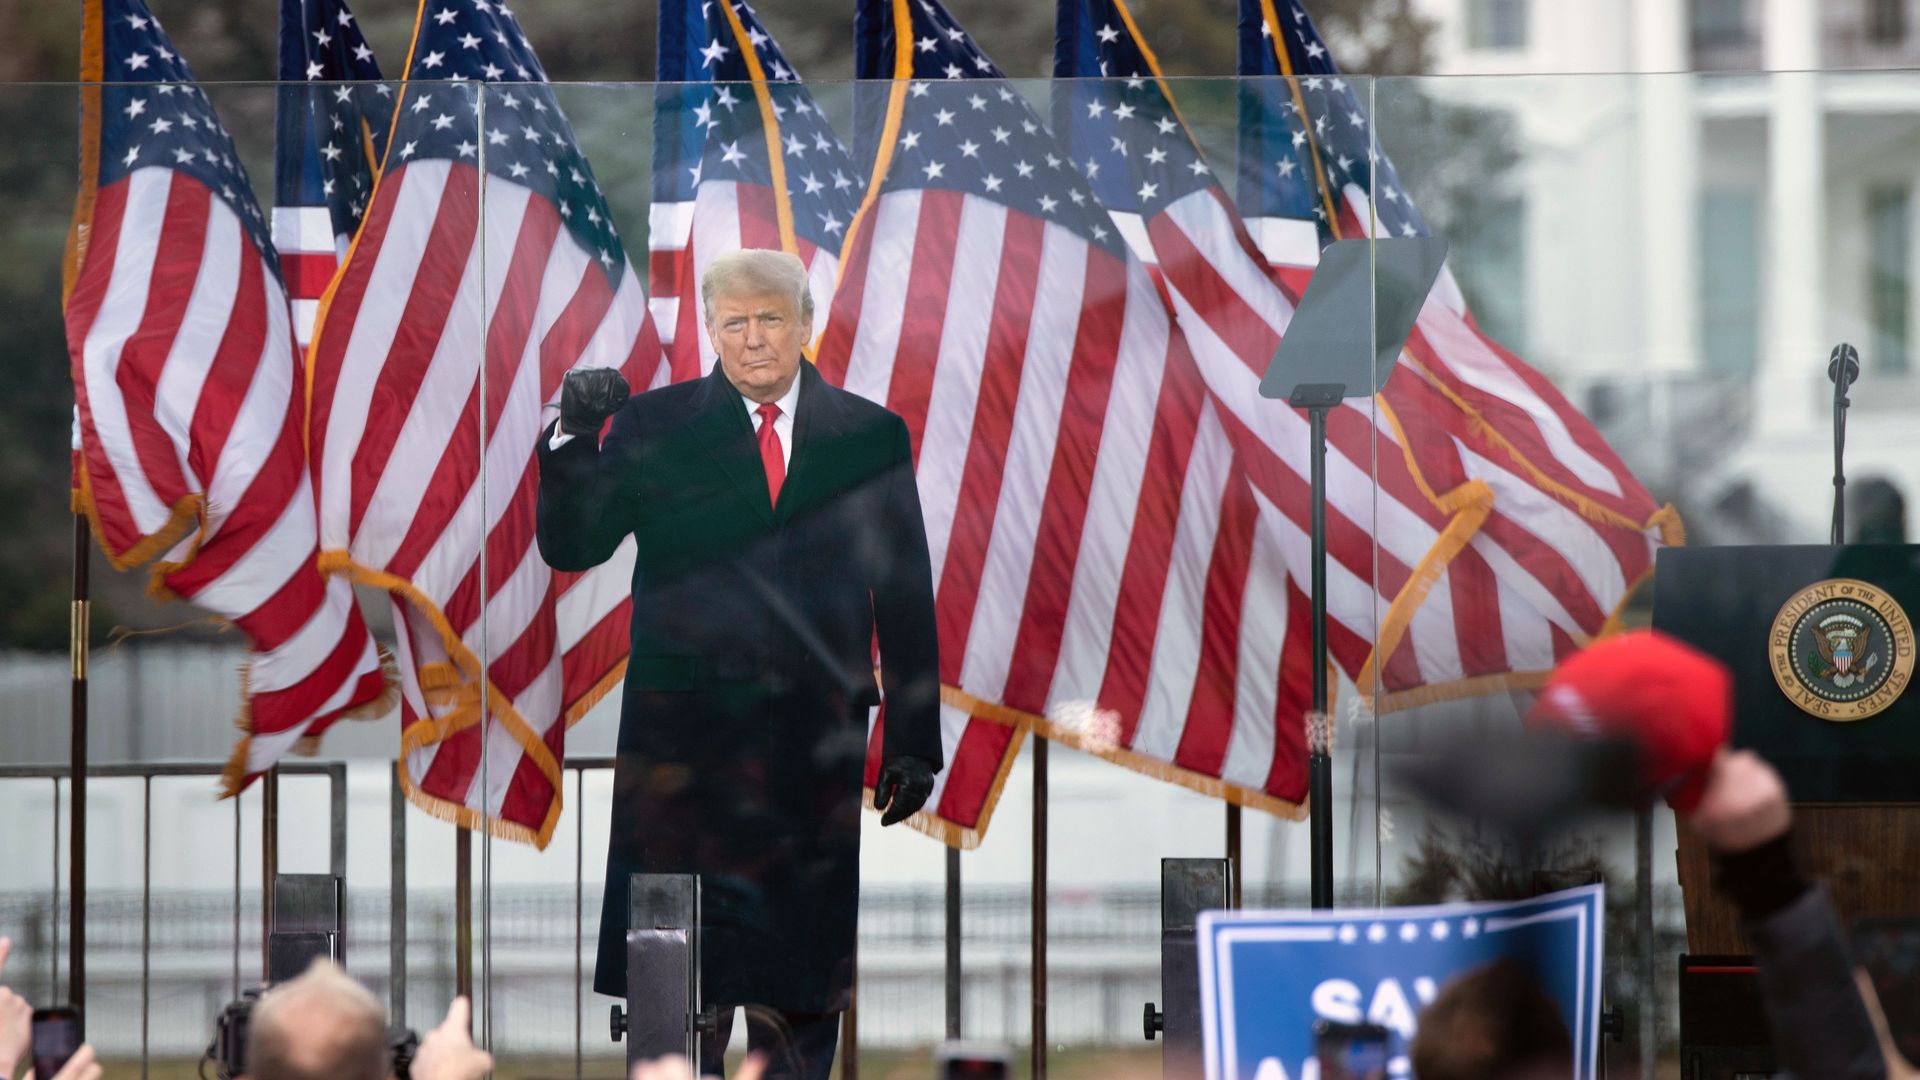 President Donald Trump speaks to supporters from The Ellipse near the White House on January 6, 2021